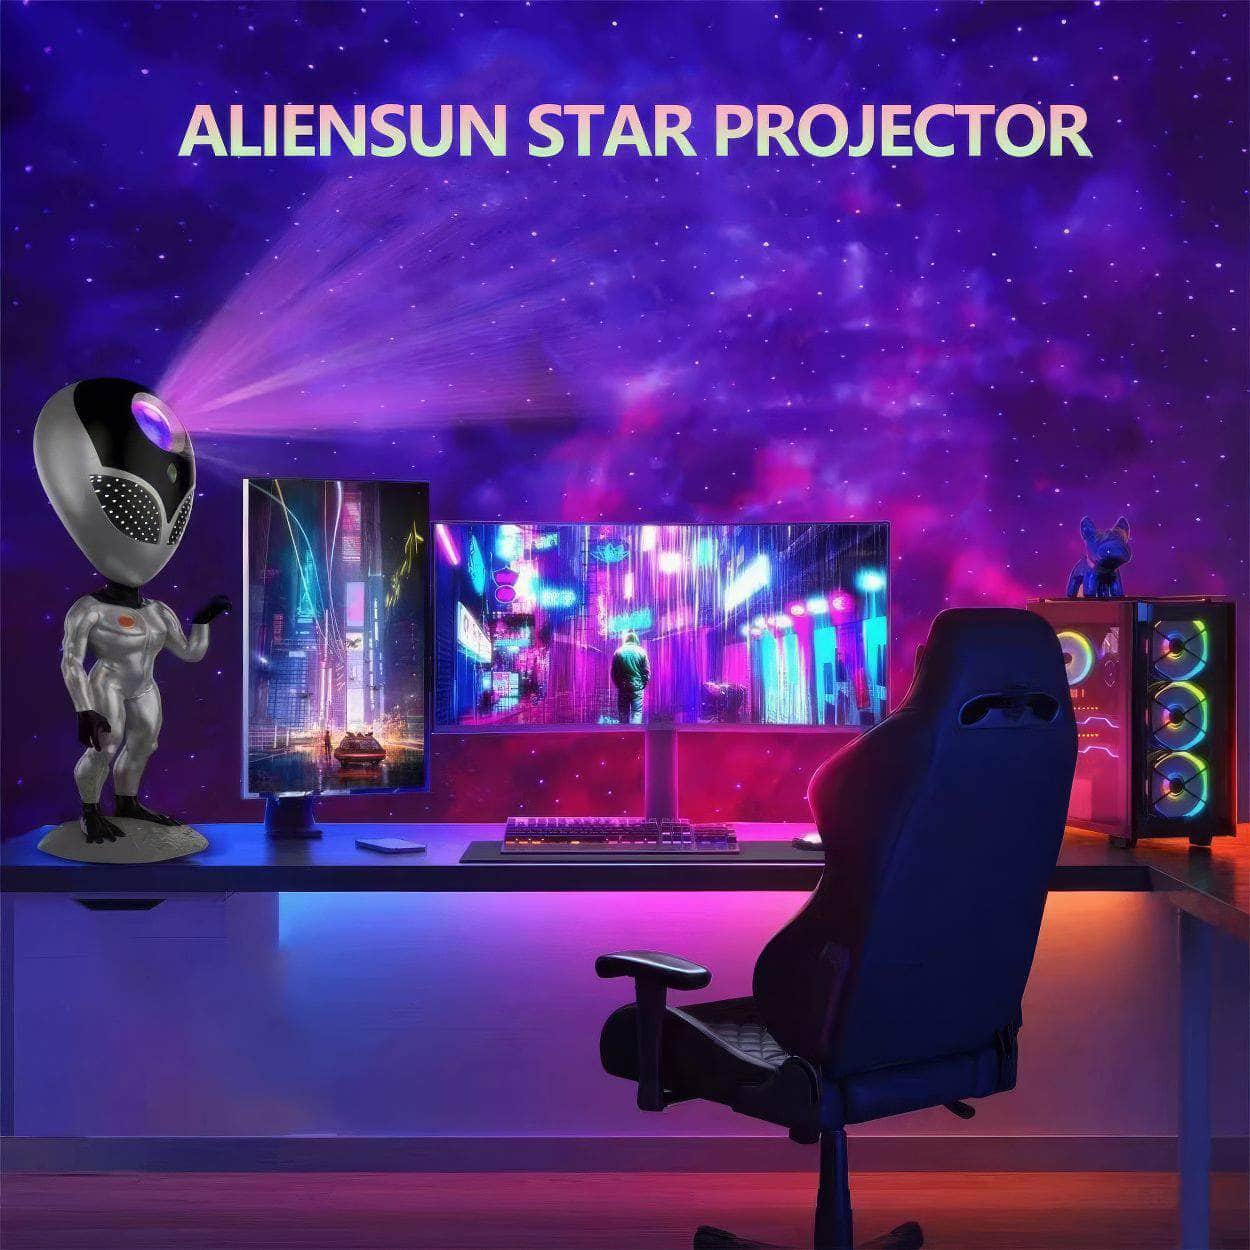 LED Alien Galaxy Projector Light - Creates Atmosphere Night Lamp for Bedroom, Gaming Room, and Desktop Decoration Product contains / USB Plug